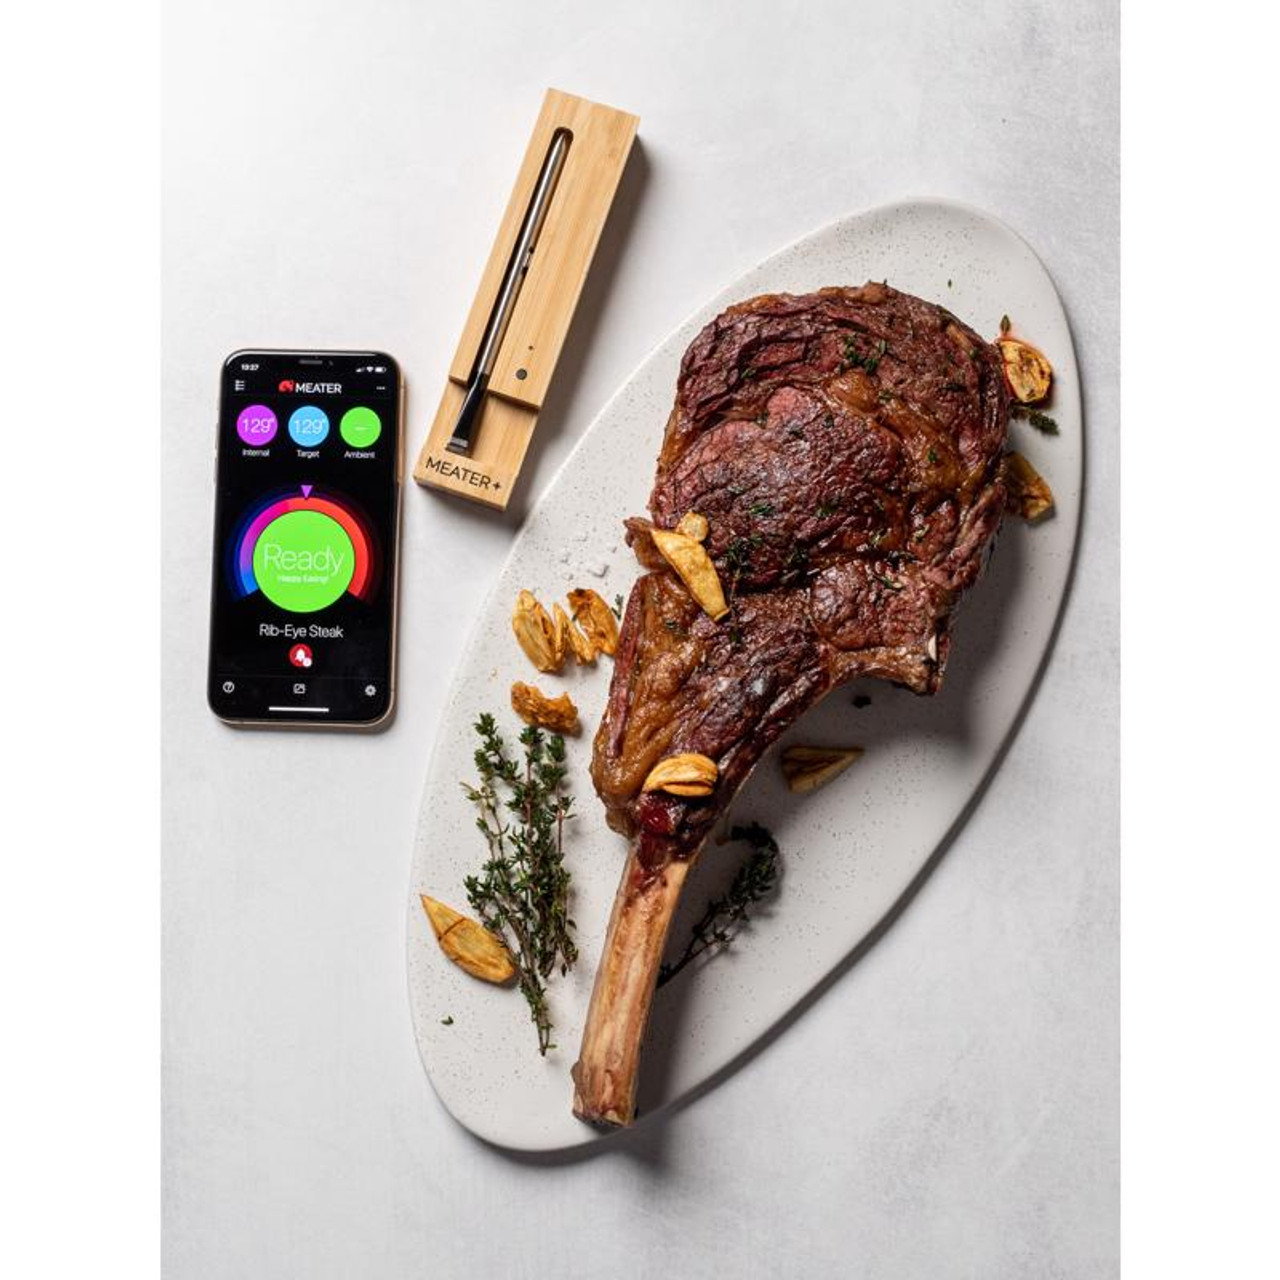 Traeger BAC618 Bluetooth Enabled Grill & Meat Thermometer - Bar-B